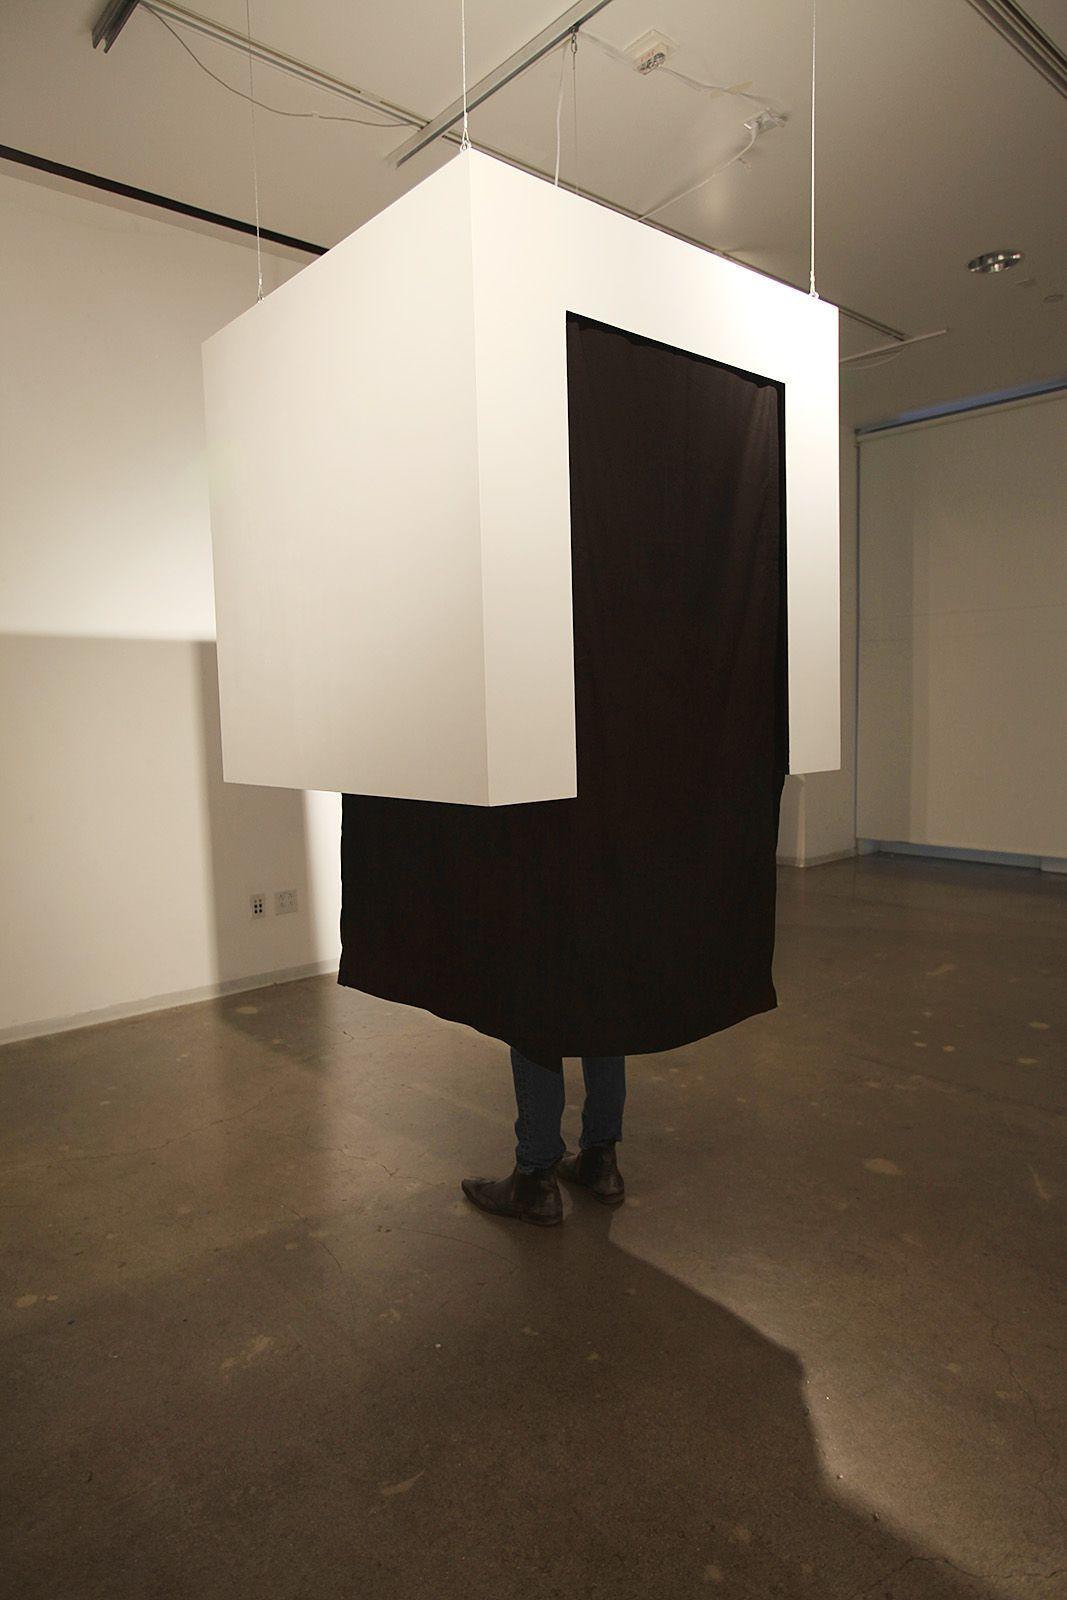 There is a white cube suspended from the air, with a black rectangle intersecting it. The black rectangle seems to be like a room inside the white cube. There are a pair of legs standing inside the white cube.